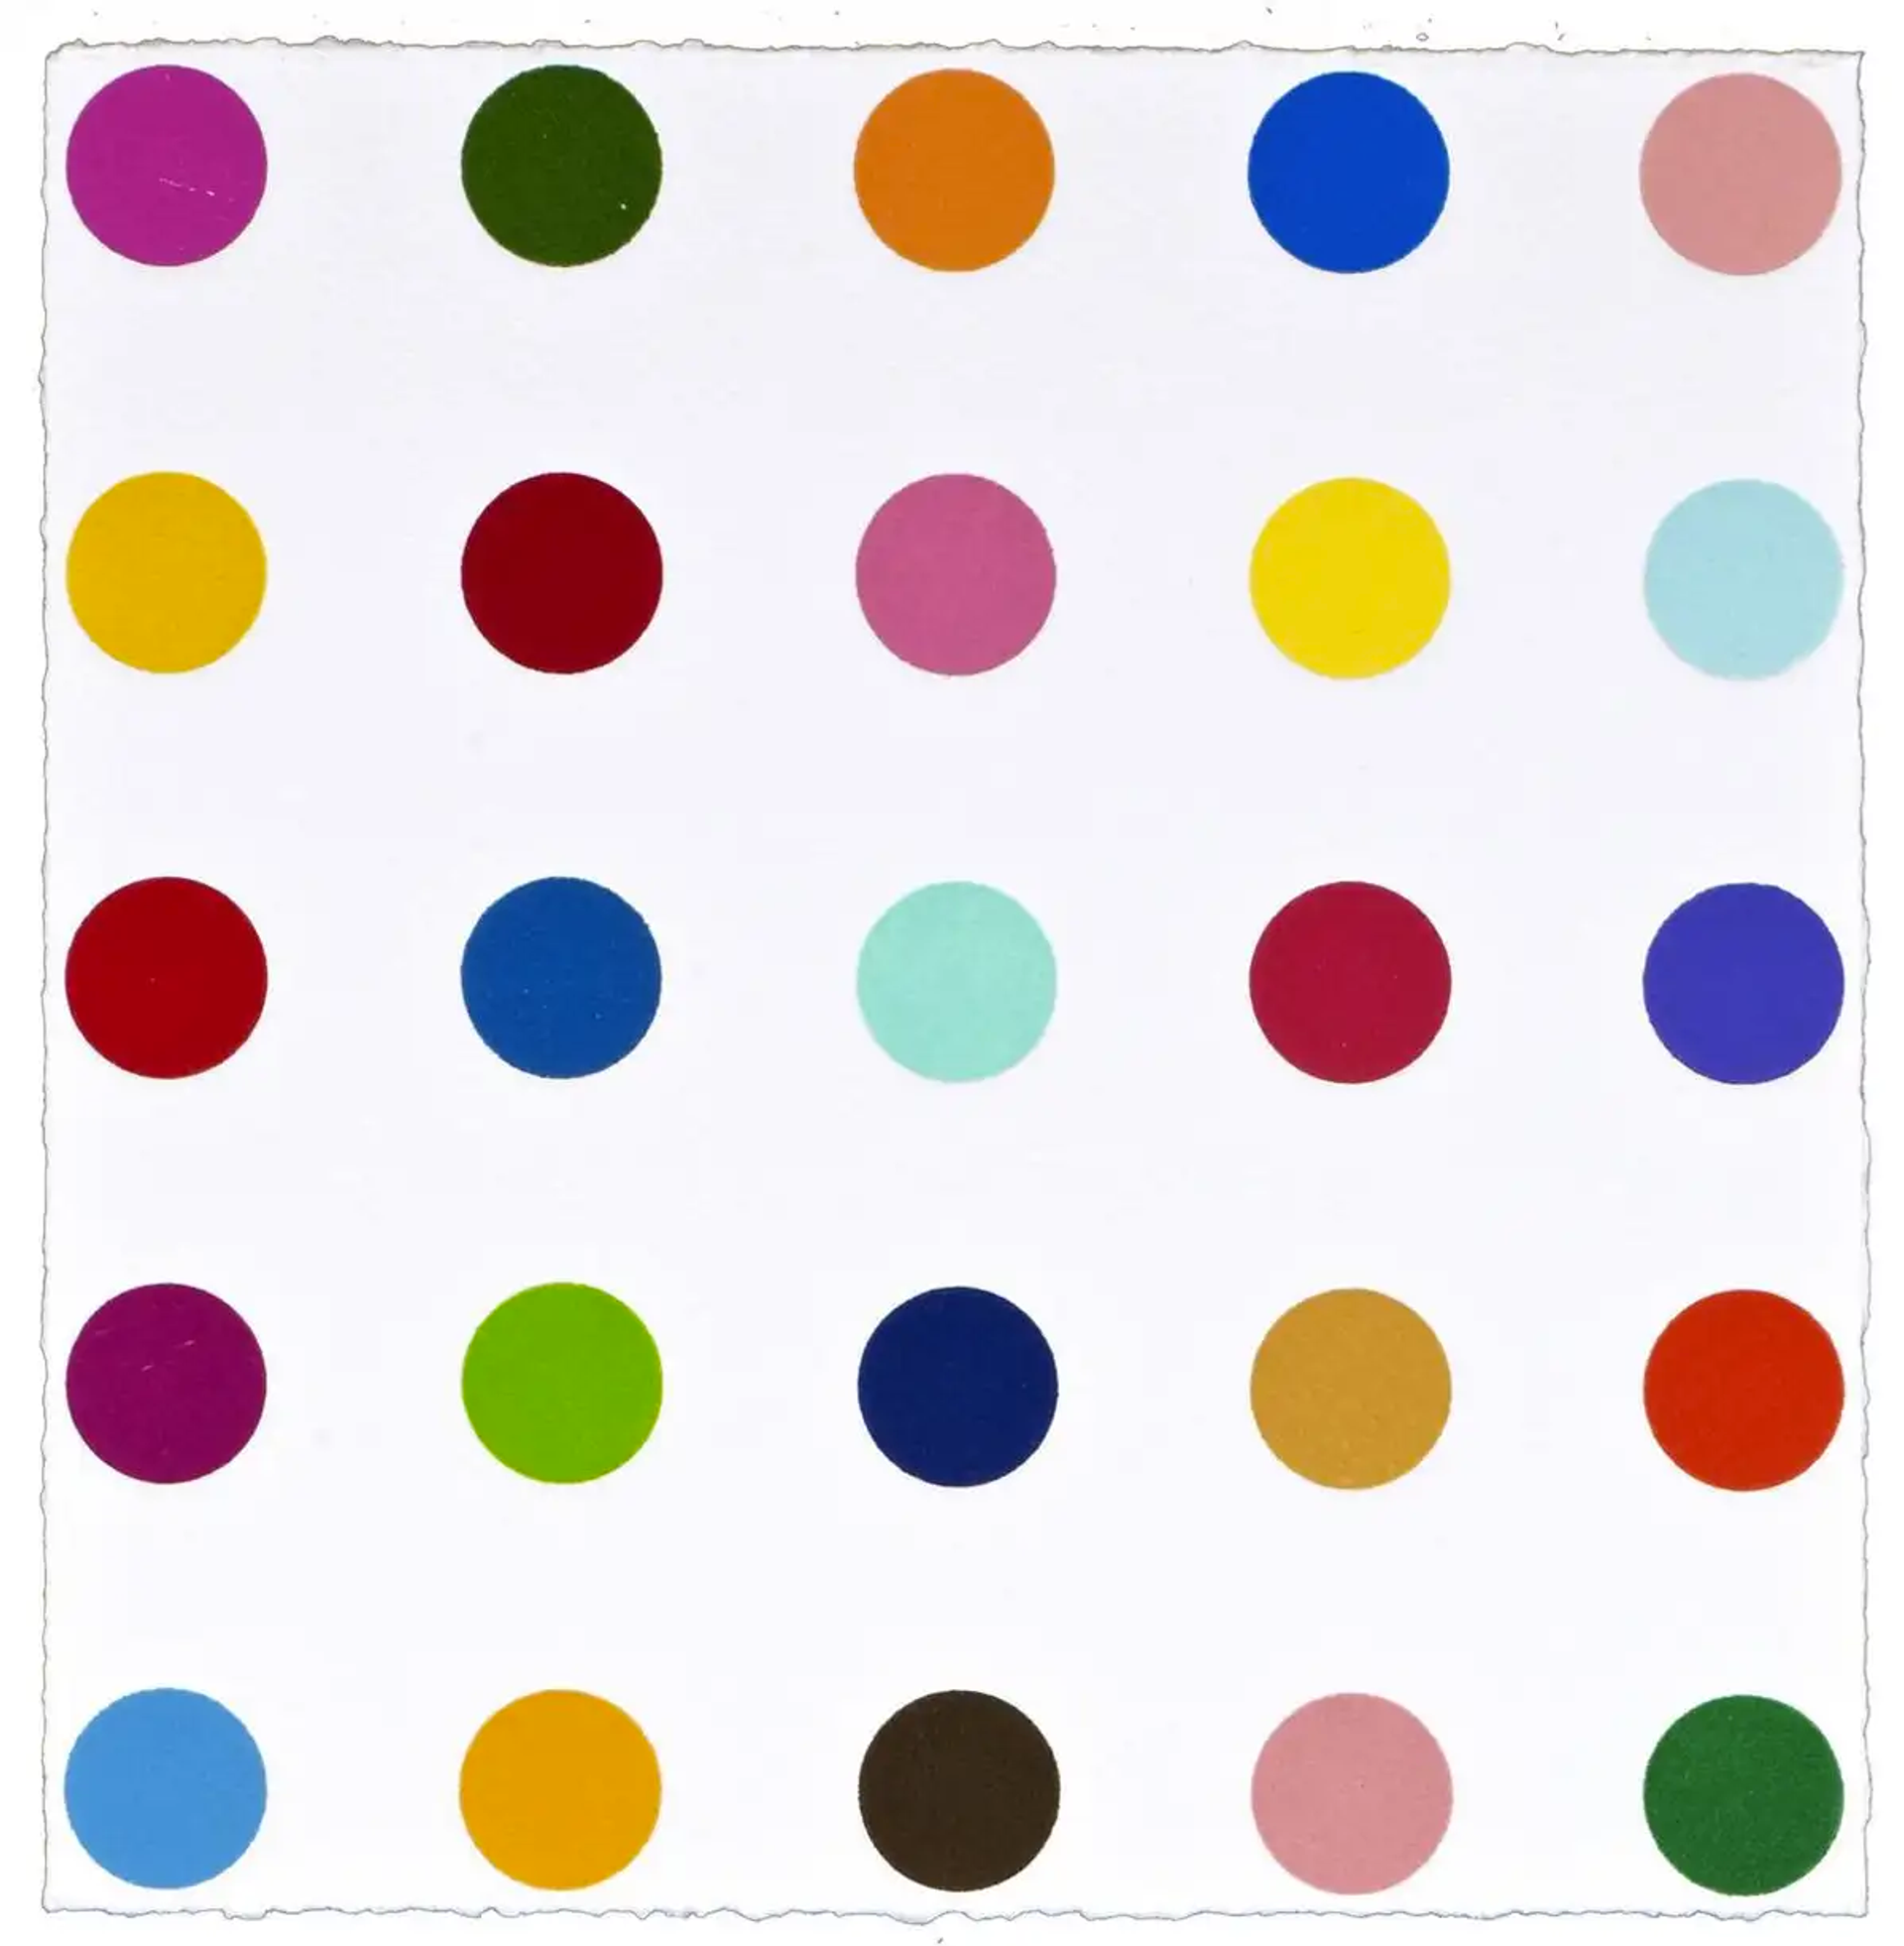 The square print shows five rows of spots that are identical in size and shape, each depicting a unique colour.